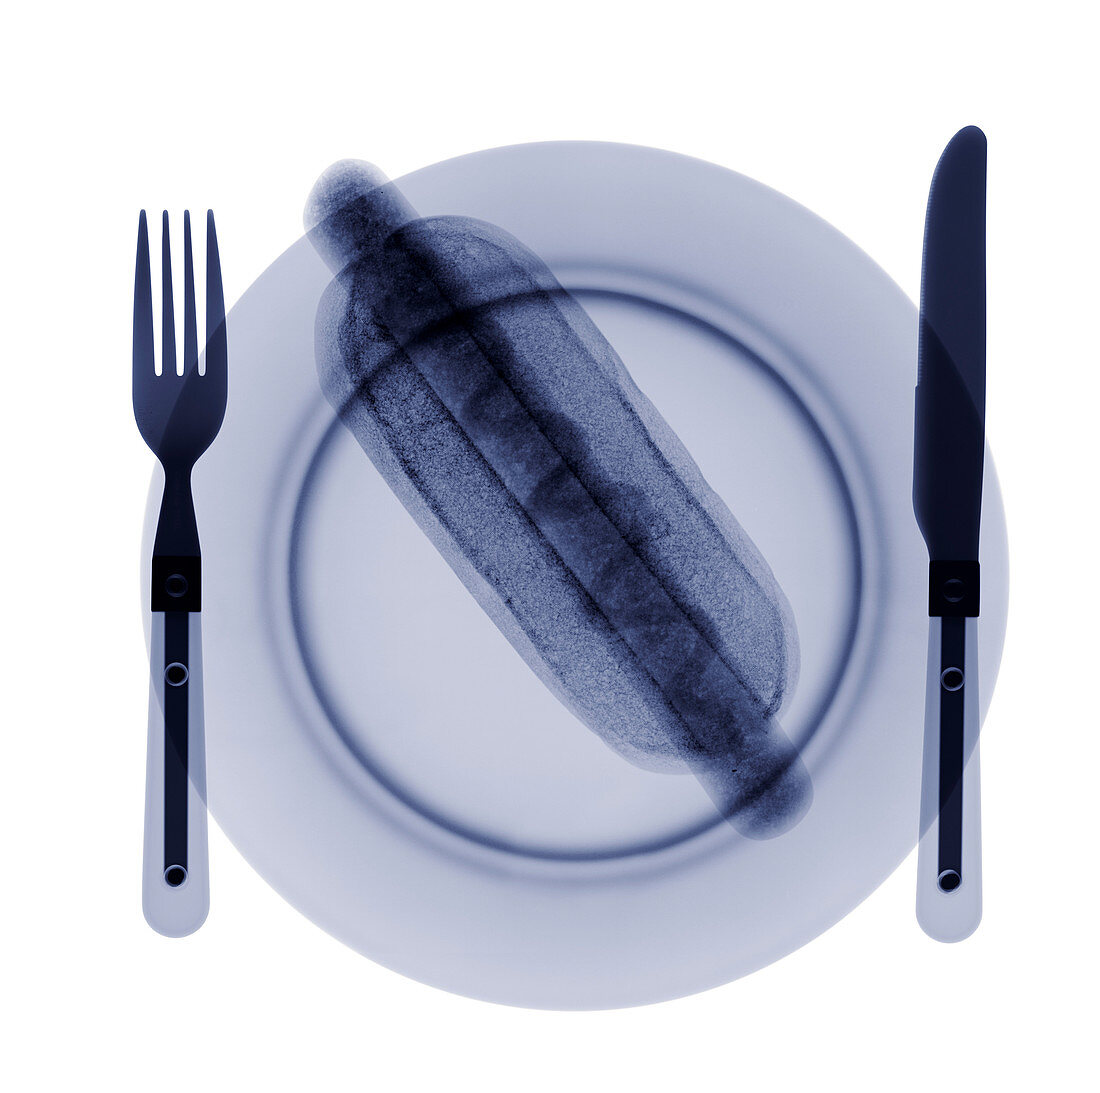 Hot dog on a plate,X-ray